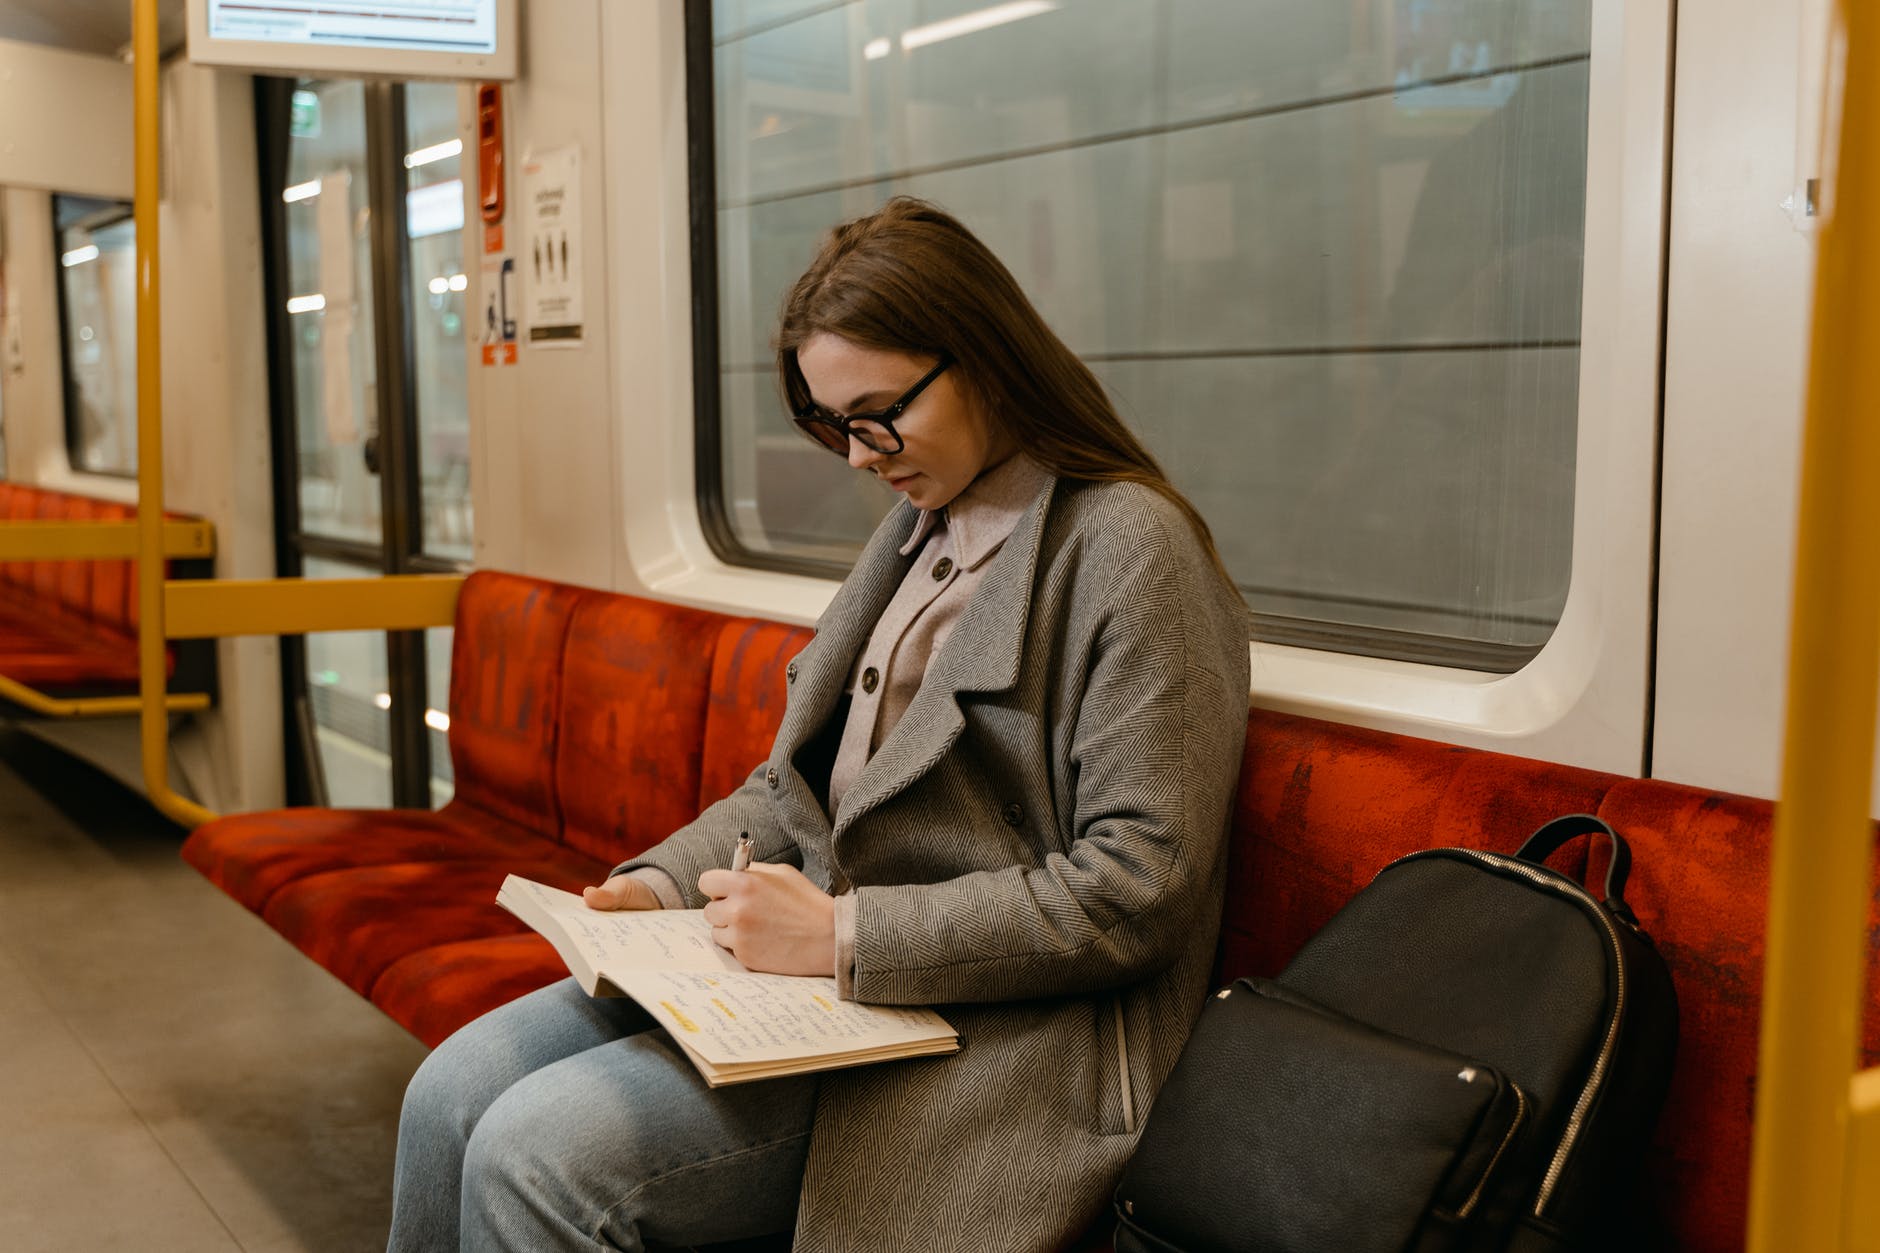 a woman writing on a book sitting in a train